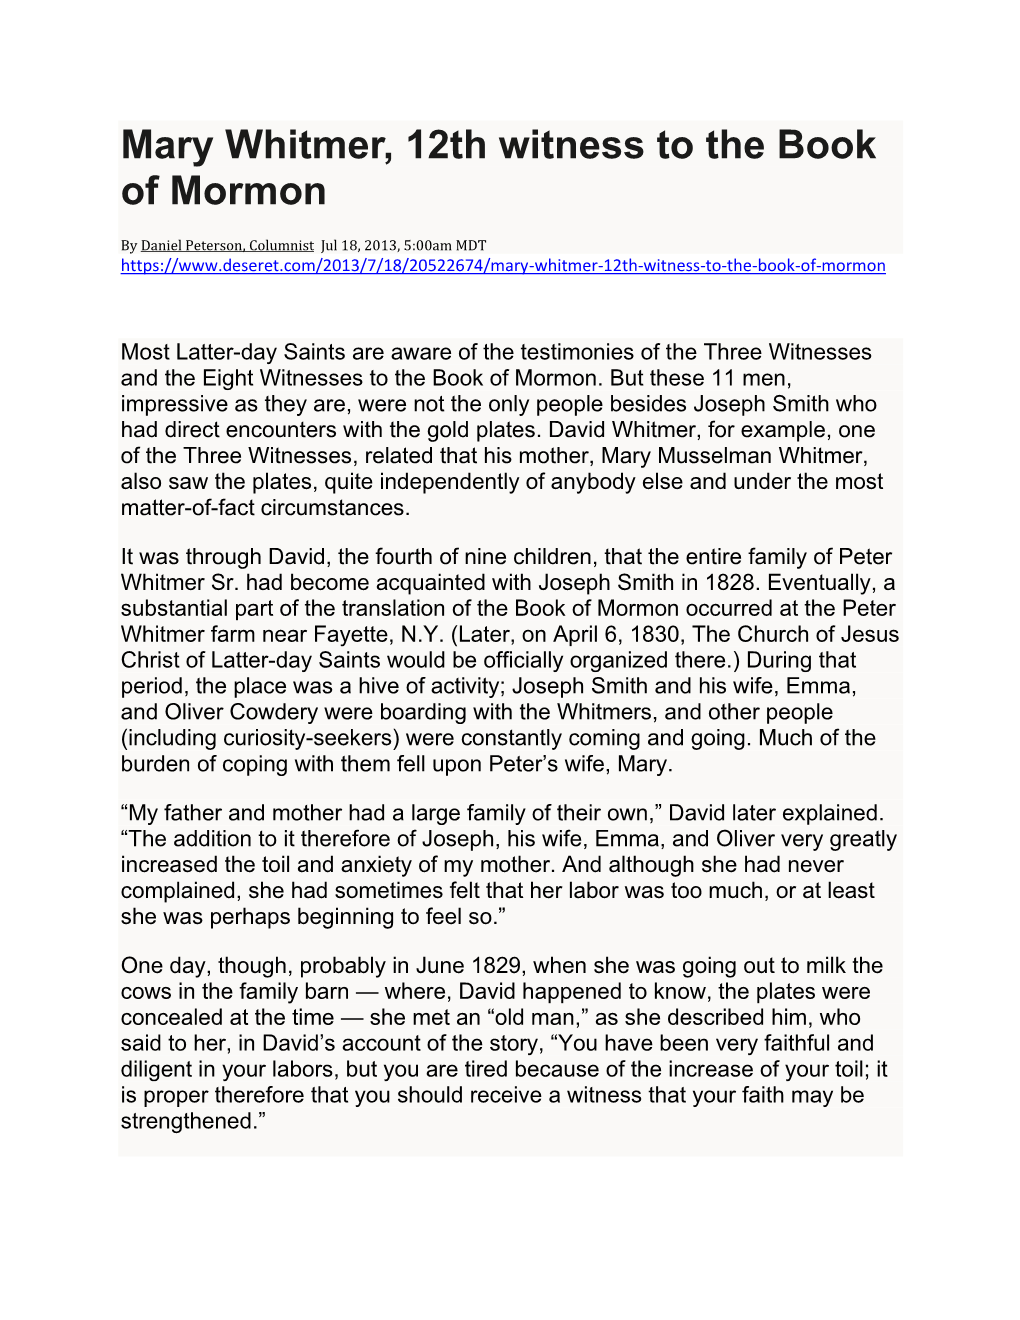 Mary Whitmer, 12Th Witness to the Book of Mormon(New)